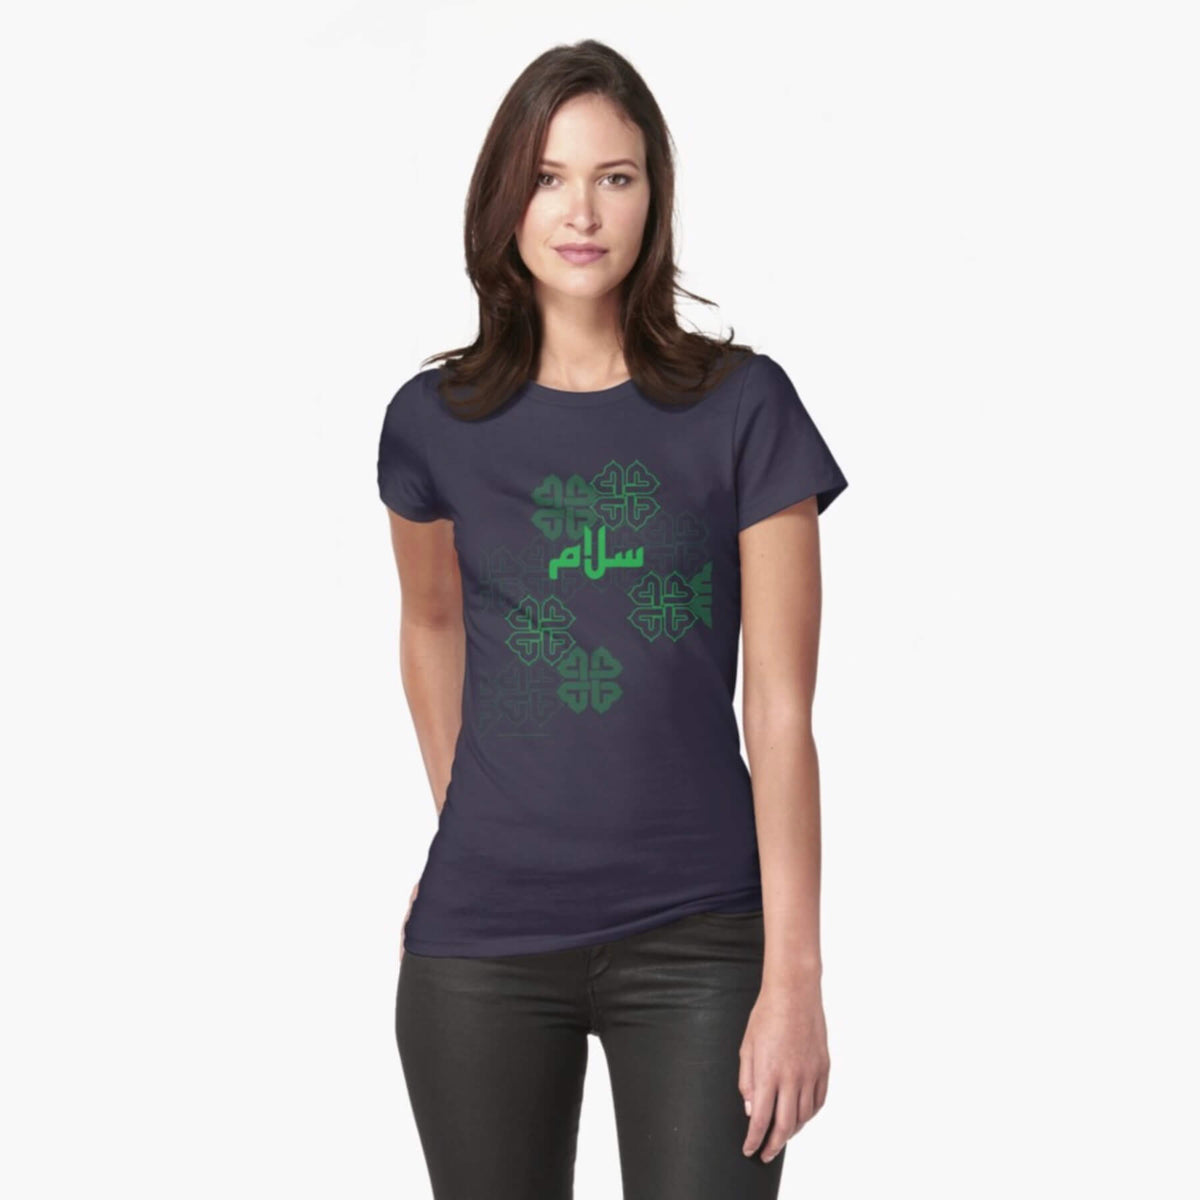 A white female model with hazel eyes and mid-brown shoulder length hair wears the Haluna Happy Names exclusive &#39;Salaam—Arabic Key Words&#39; design navy loosely fitted t-shirt and a pair of tight black jeans. The word &#39;salaam&#39; is written on the tshirt in green in Arabic using a kufic-style font, across the chest of the model against a complementary green patterned background print. The tshirt ends at the woman&#39;s hips and the image cuts off mid-thigh. 